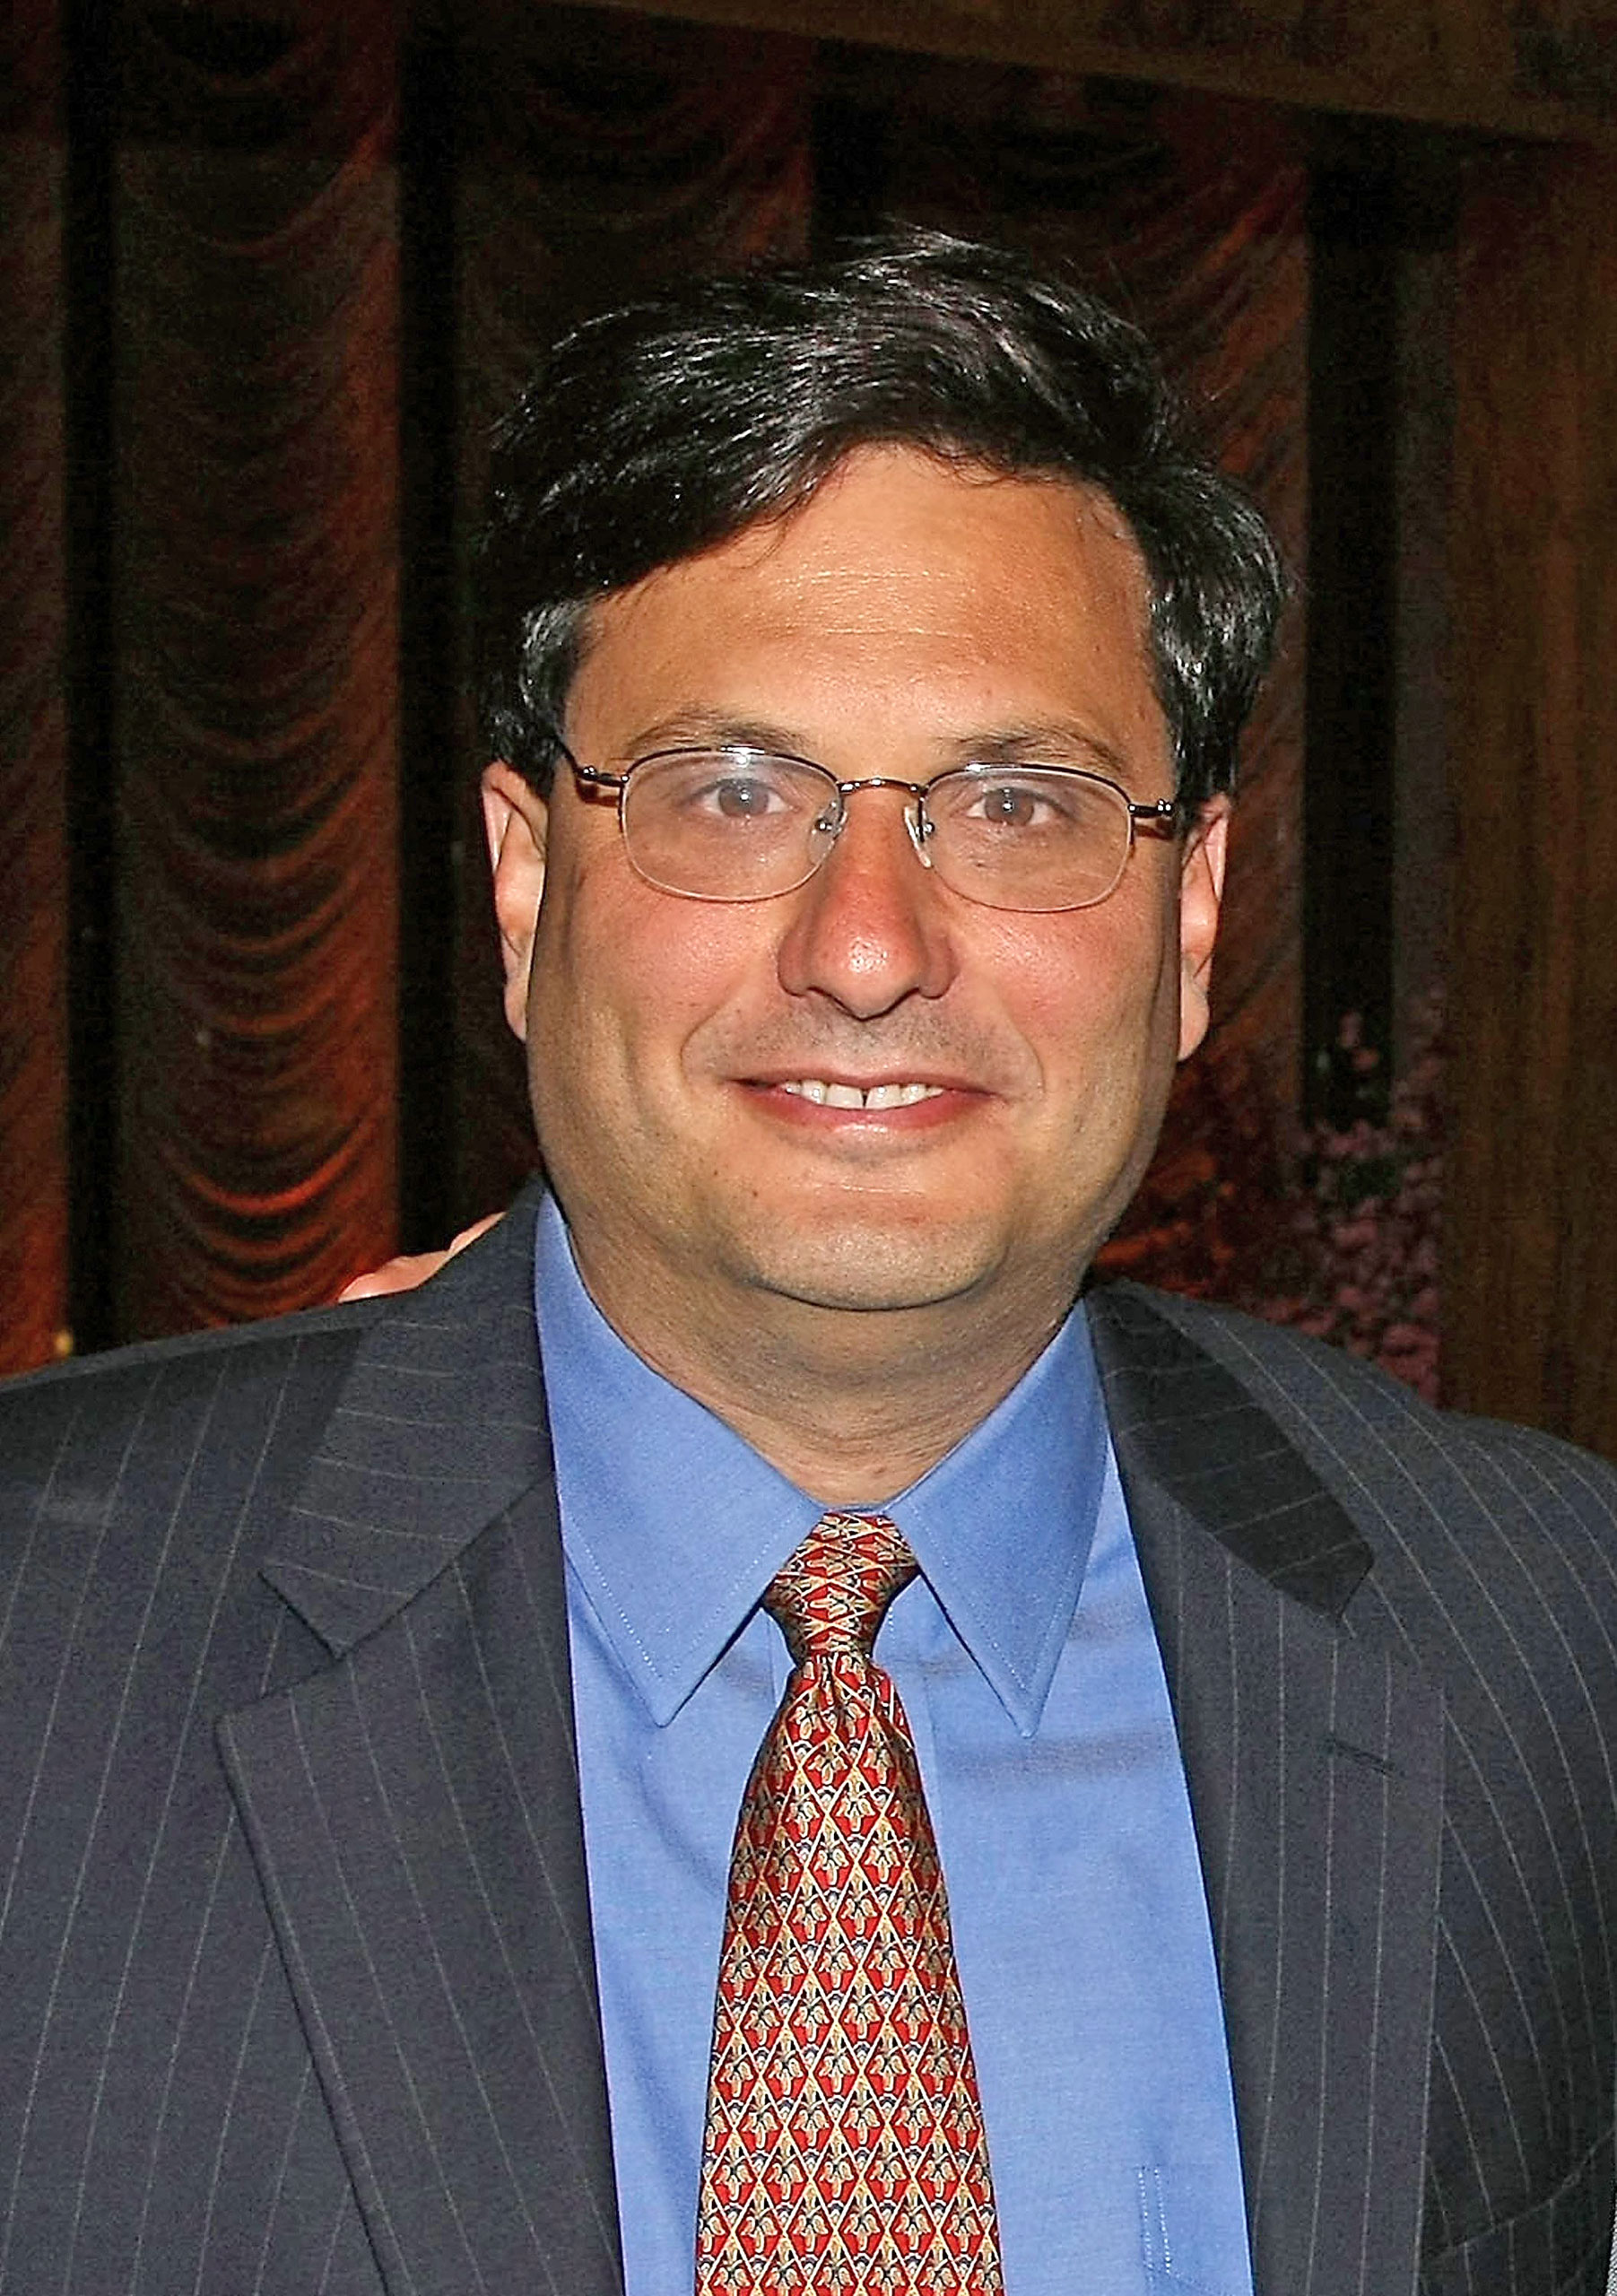 Lawyer and politcal operative Ron Klain on May 13, 2008 in New York City.